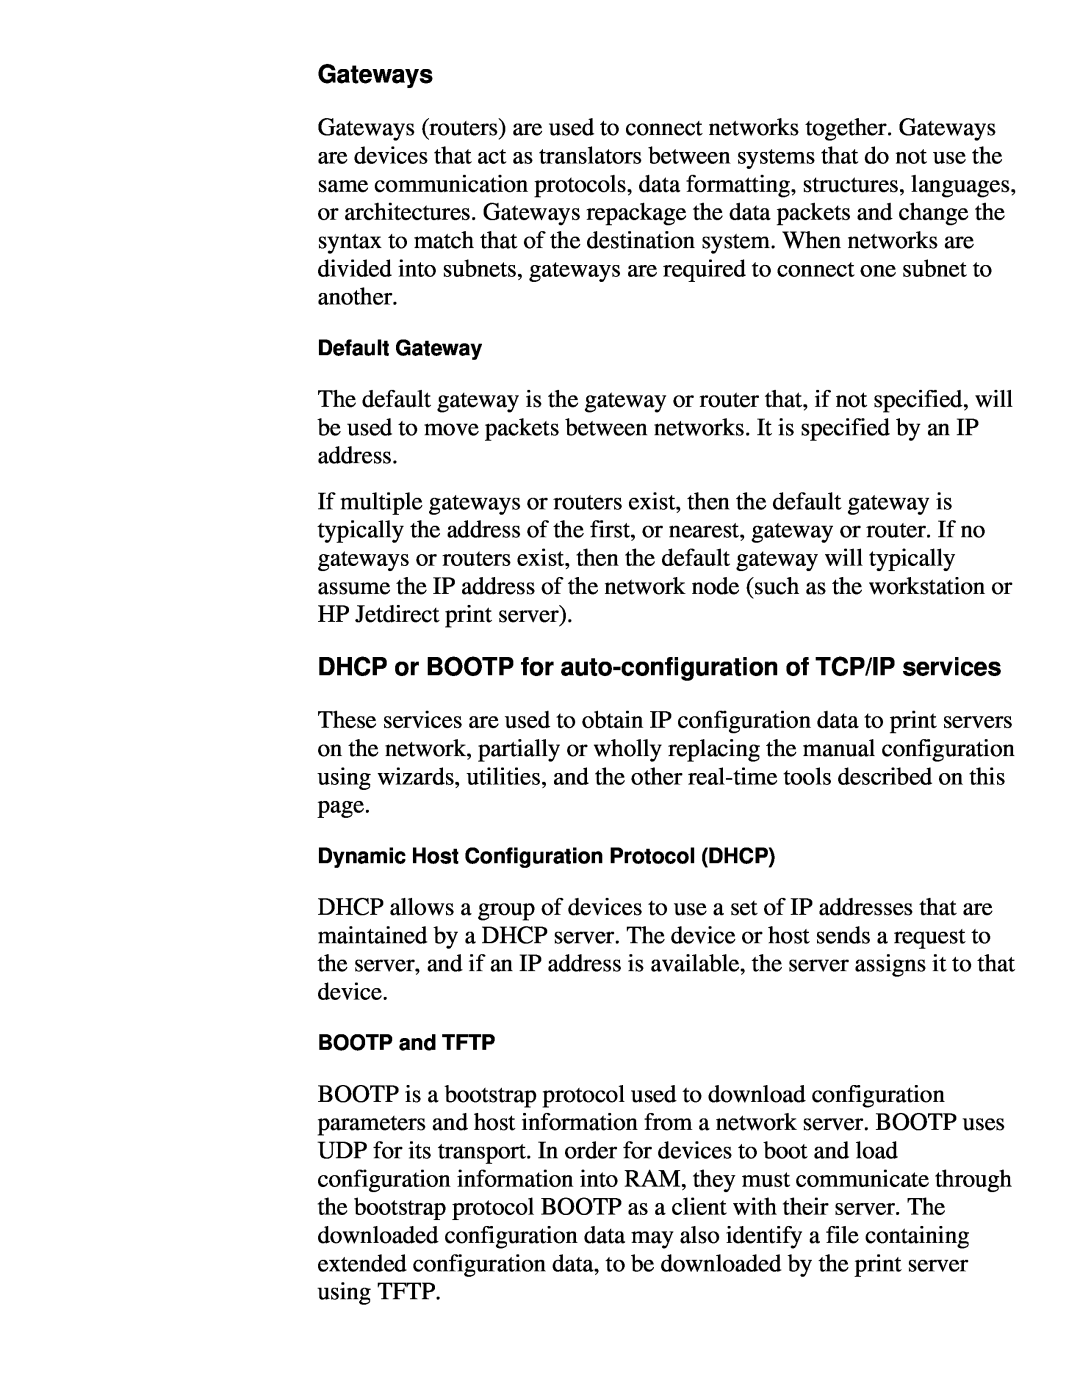 HP 310X, 175X manual Gateways, DHCP or BOOTP for auto-configuration of TCP/IP services, Default Gateway, BOOTP and TFTP 